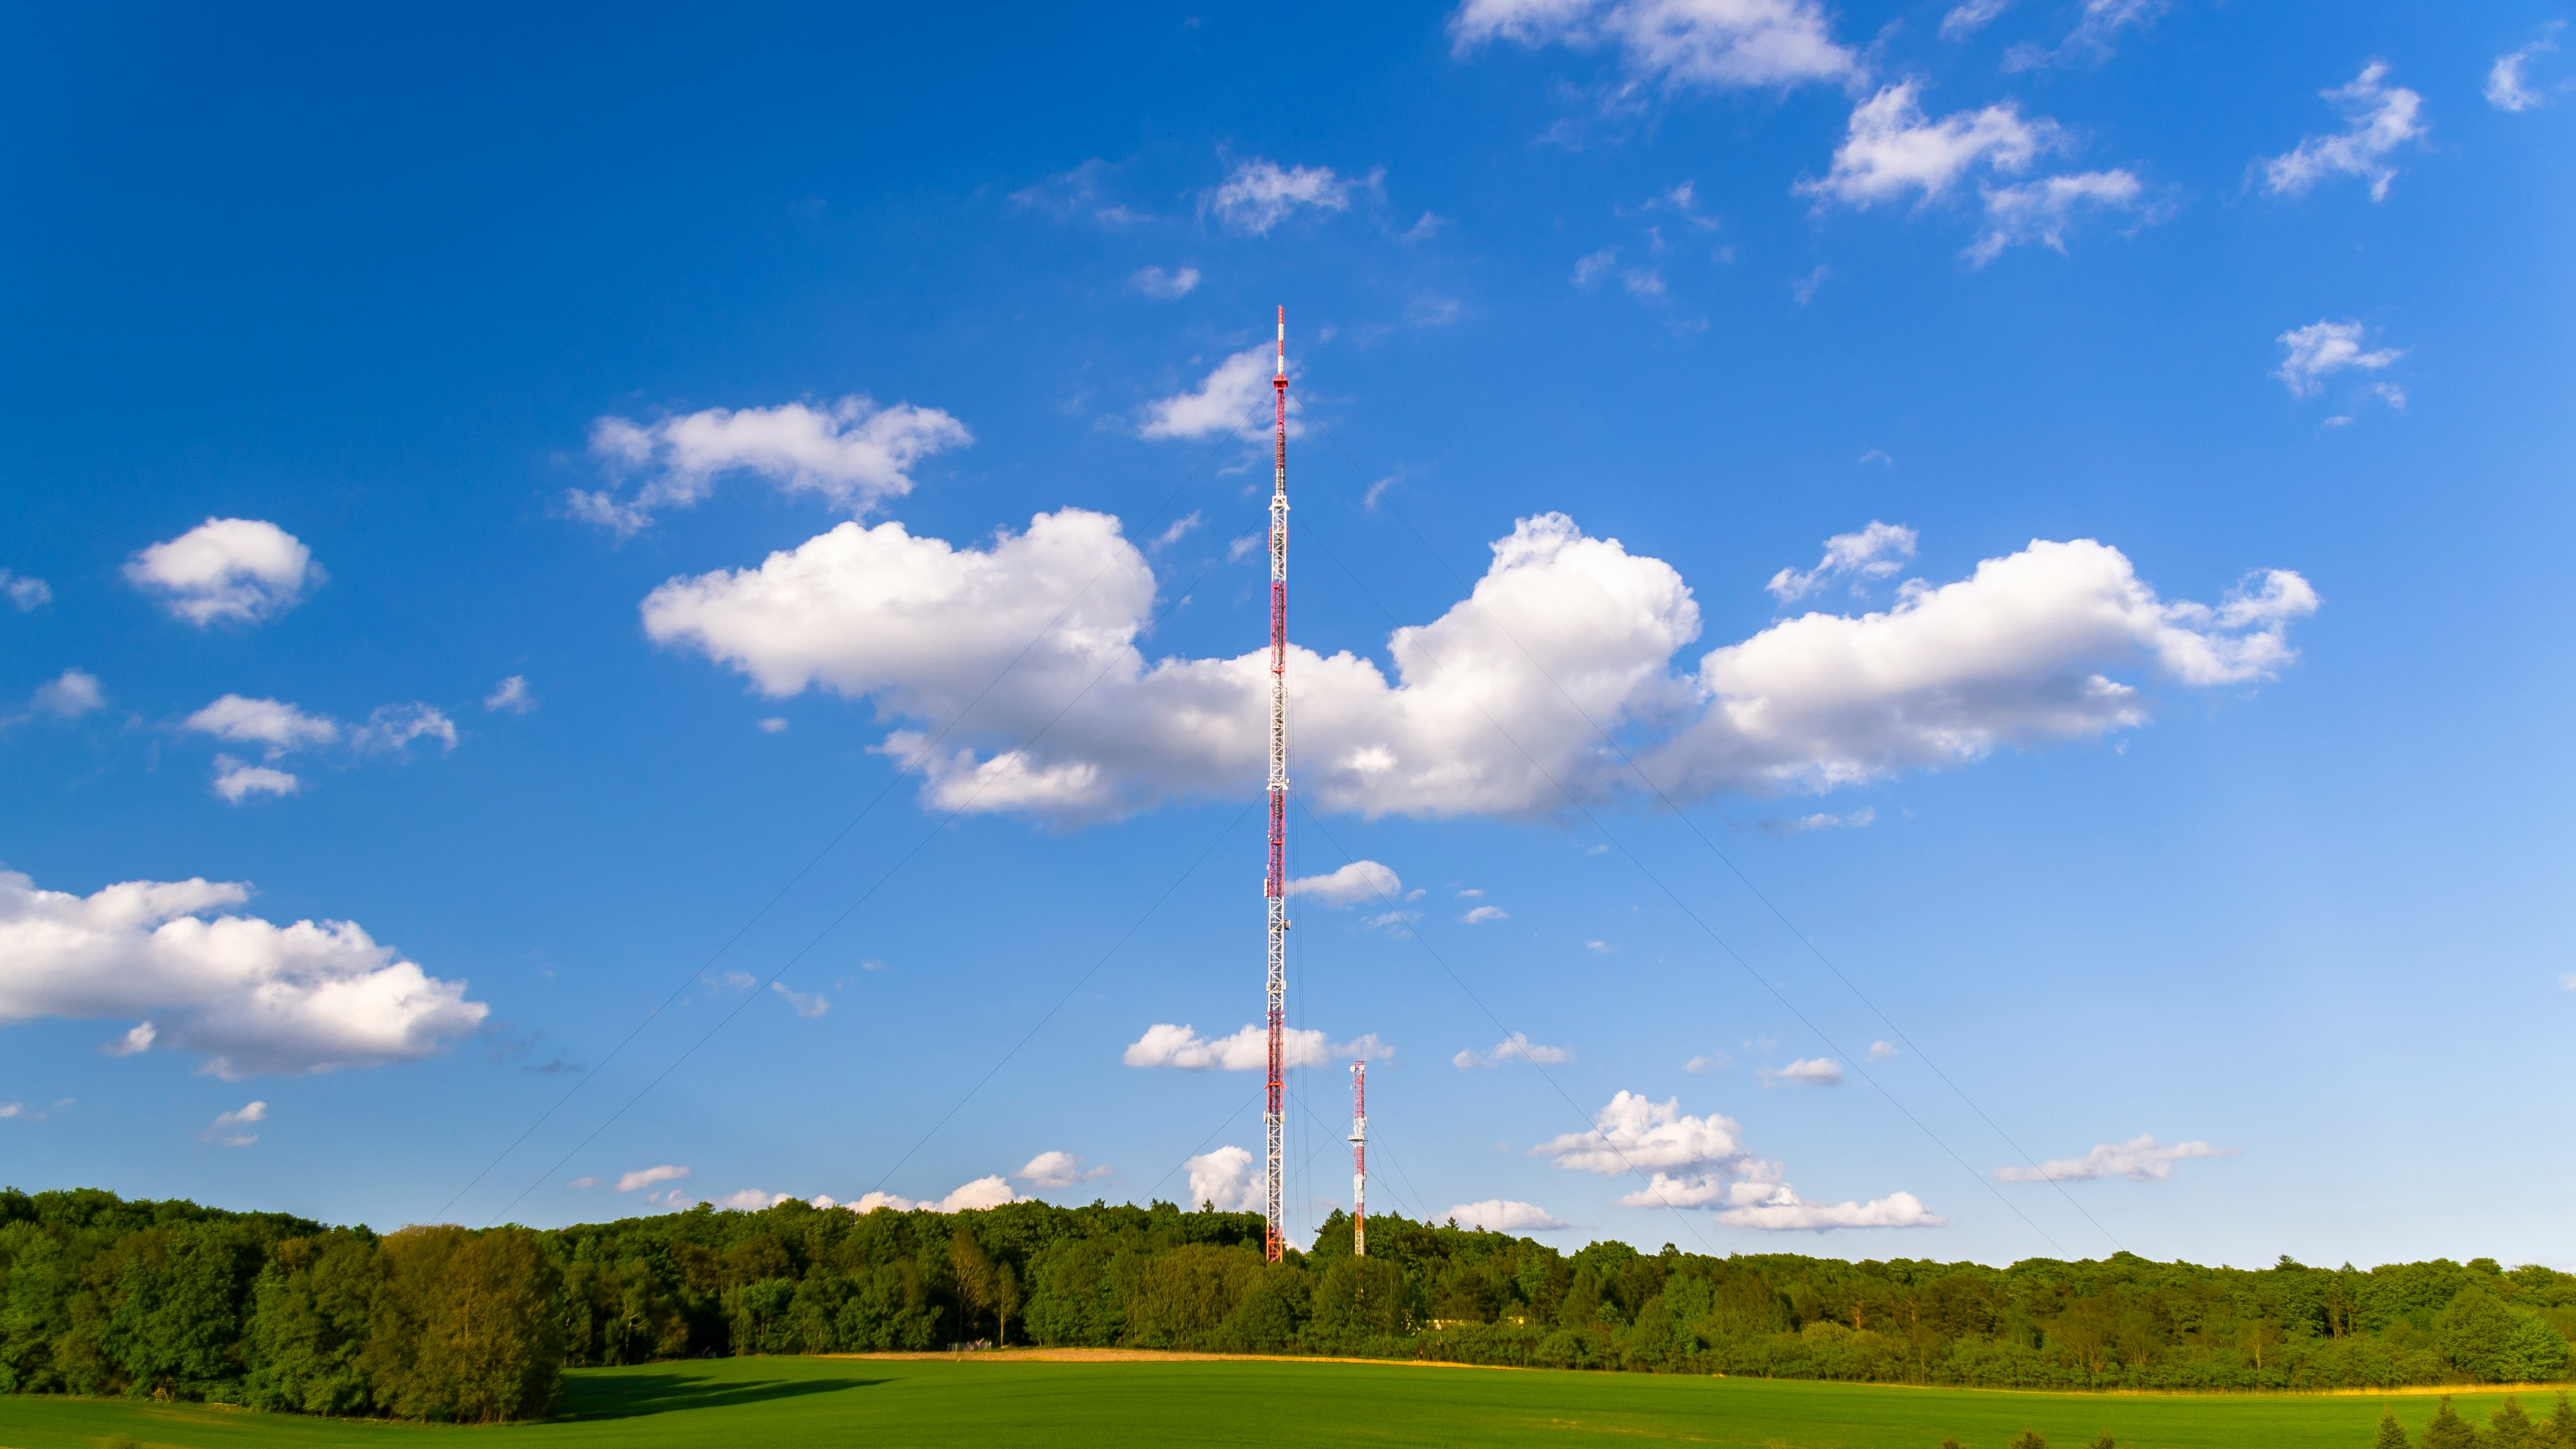 white and red flag pole on green grass field under blue and white cloudy sky during